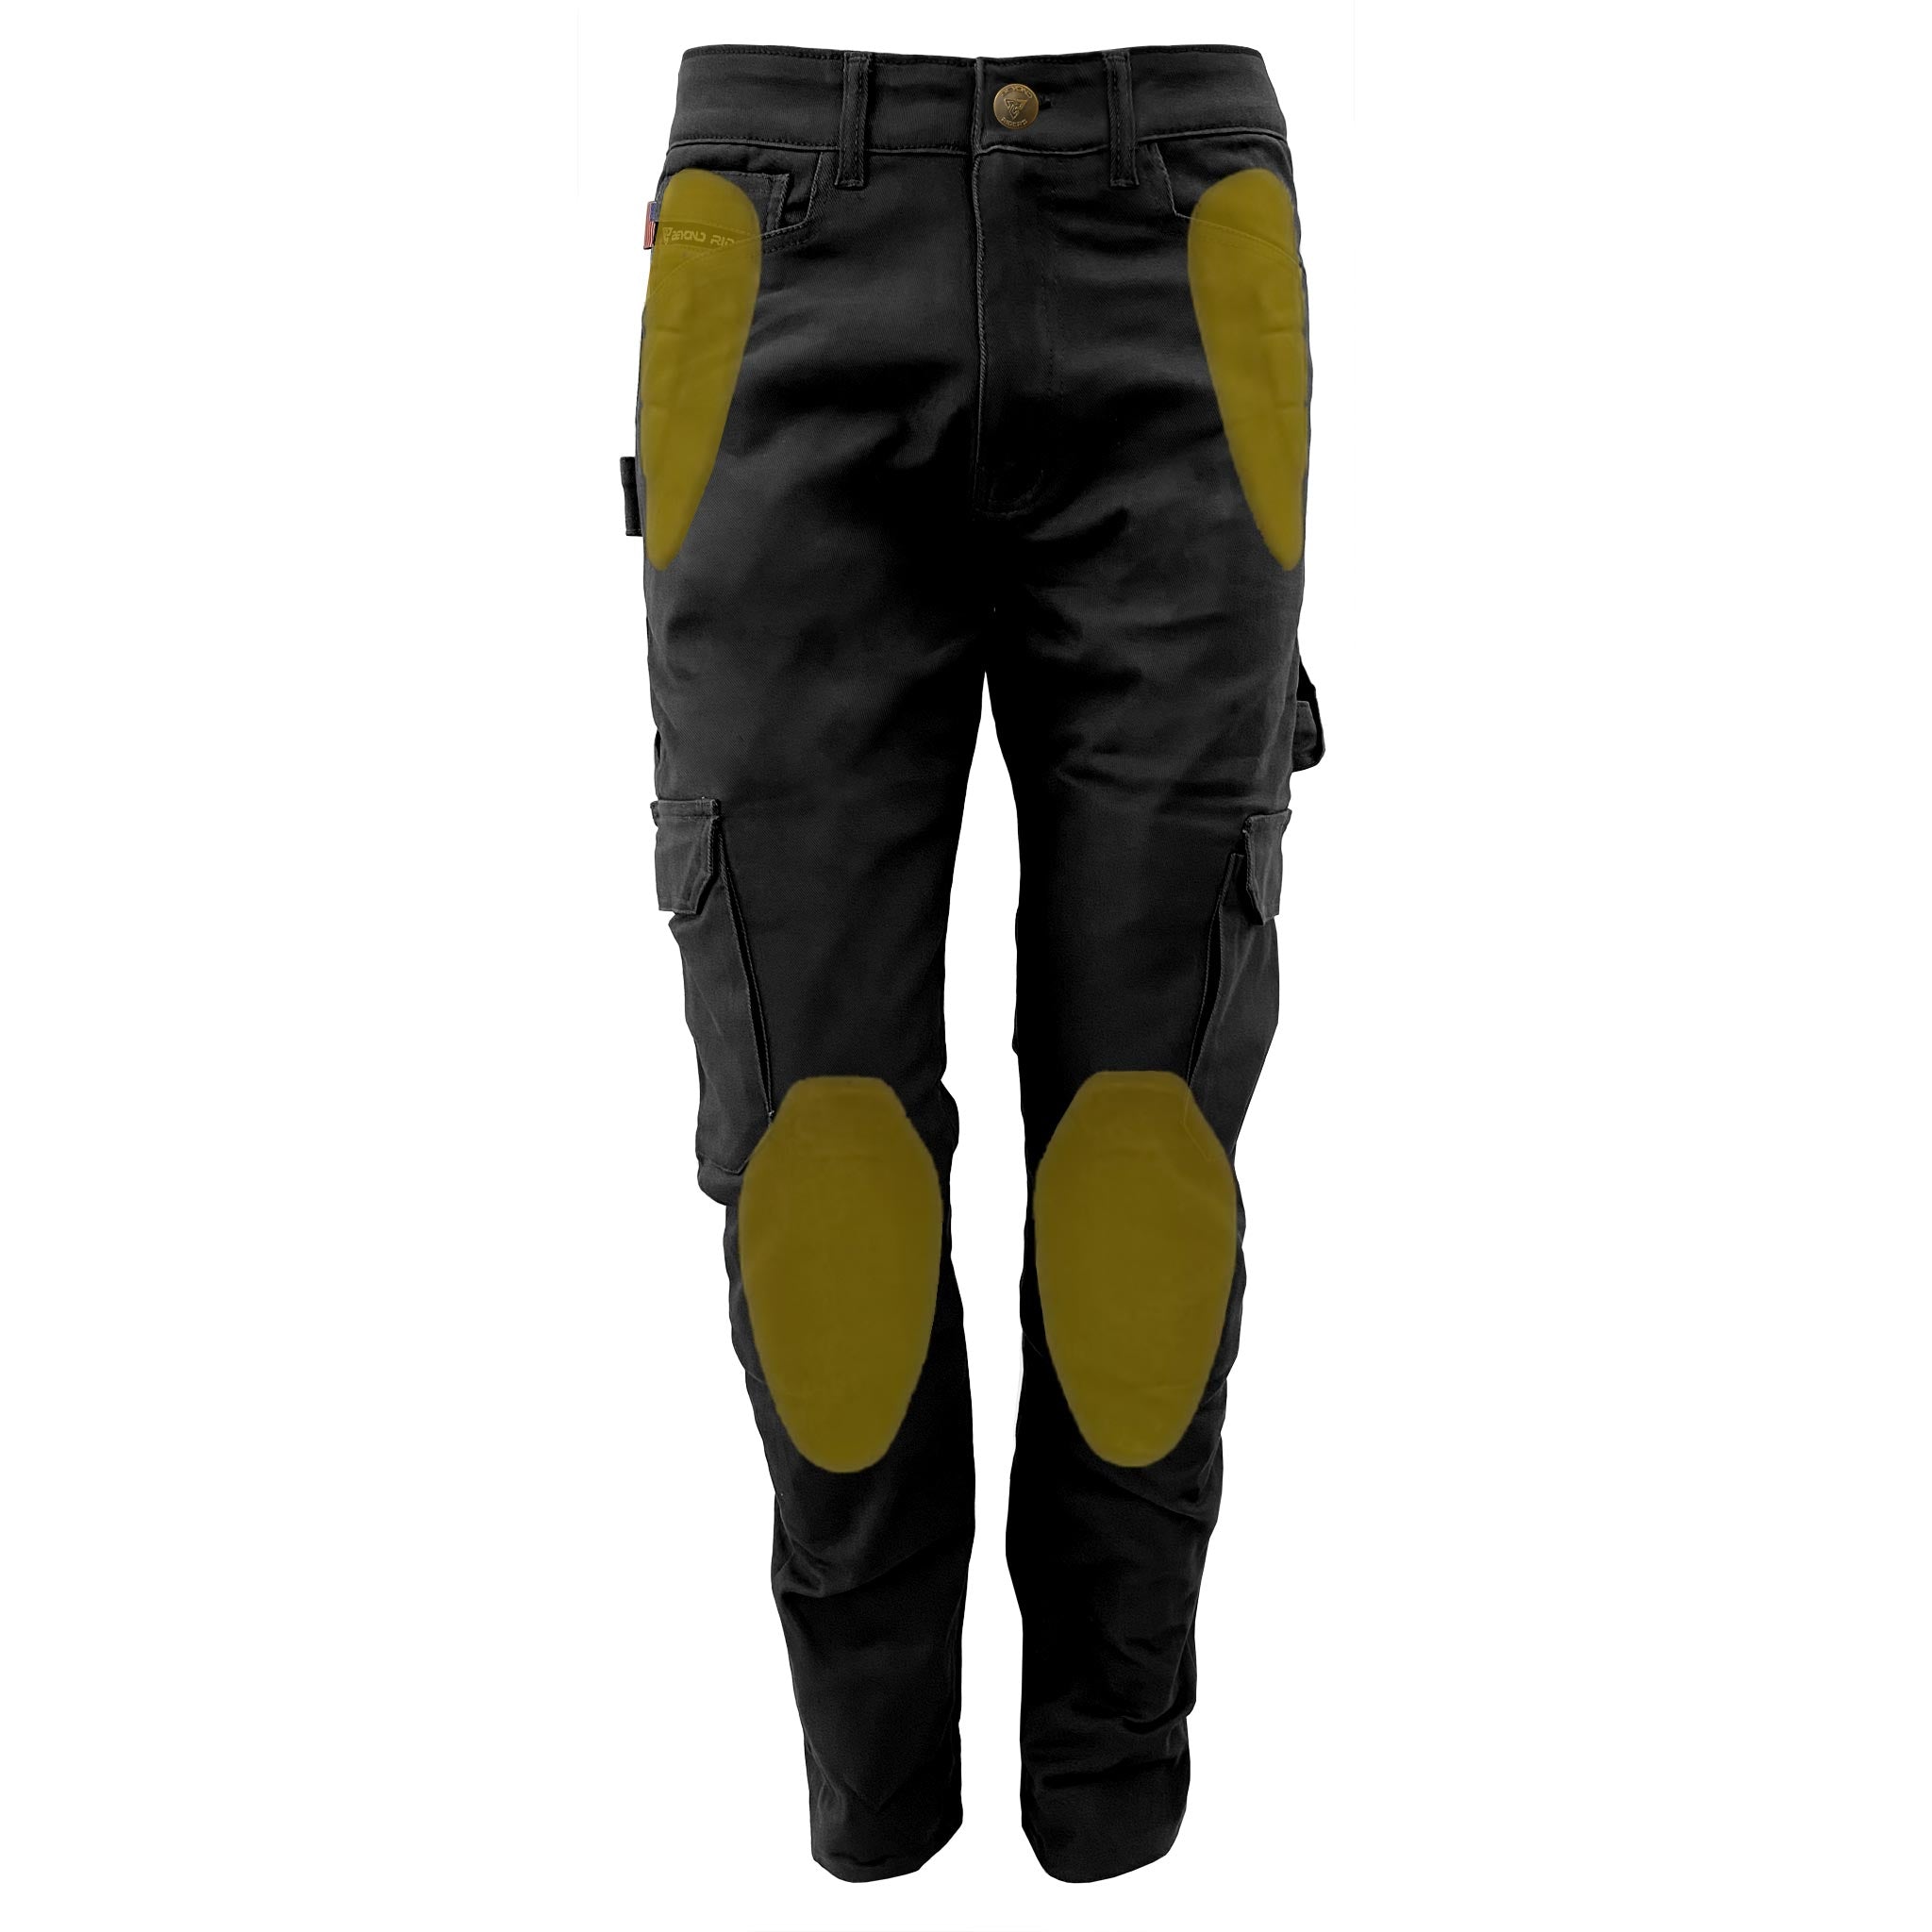 Straight Leg Cargo Pants - Black with Pads